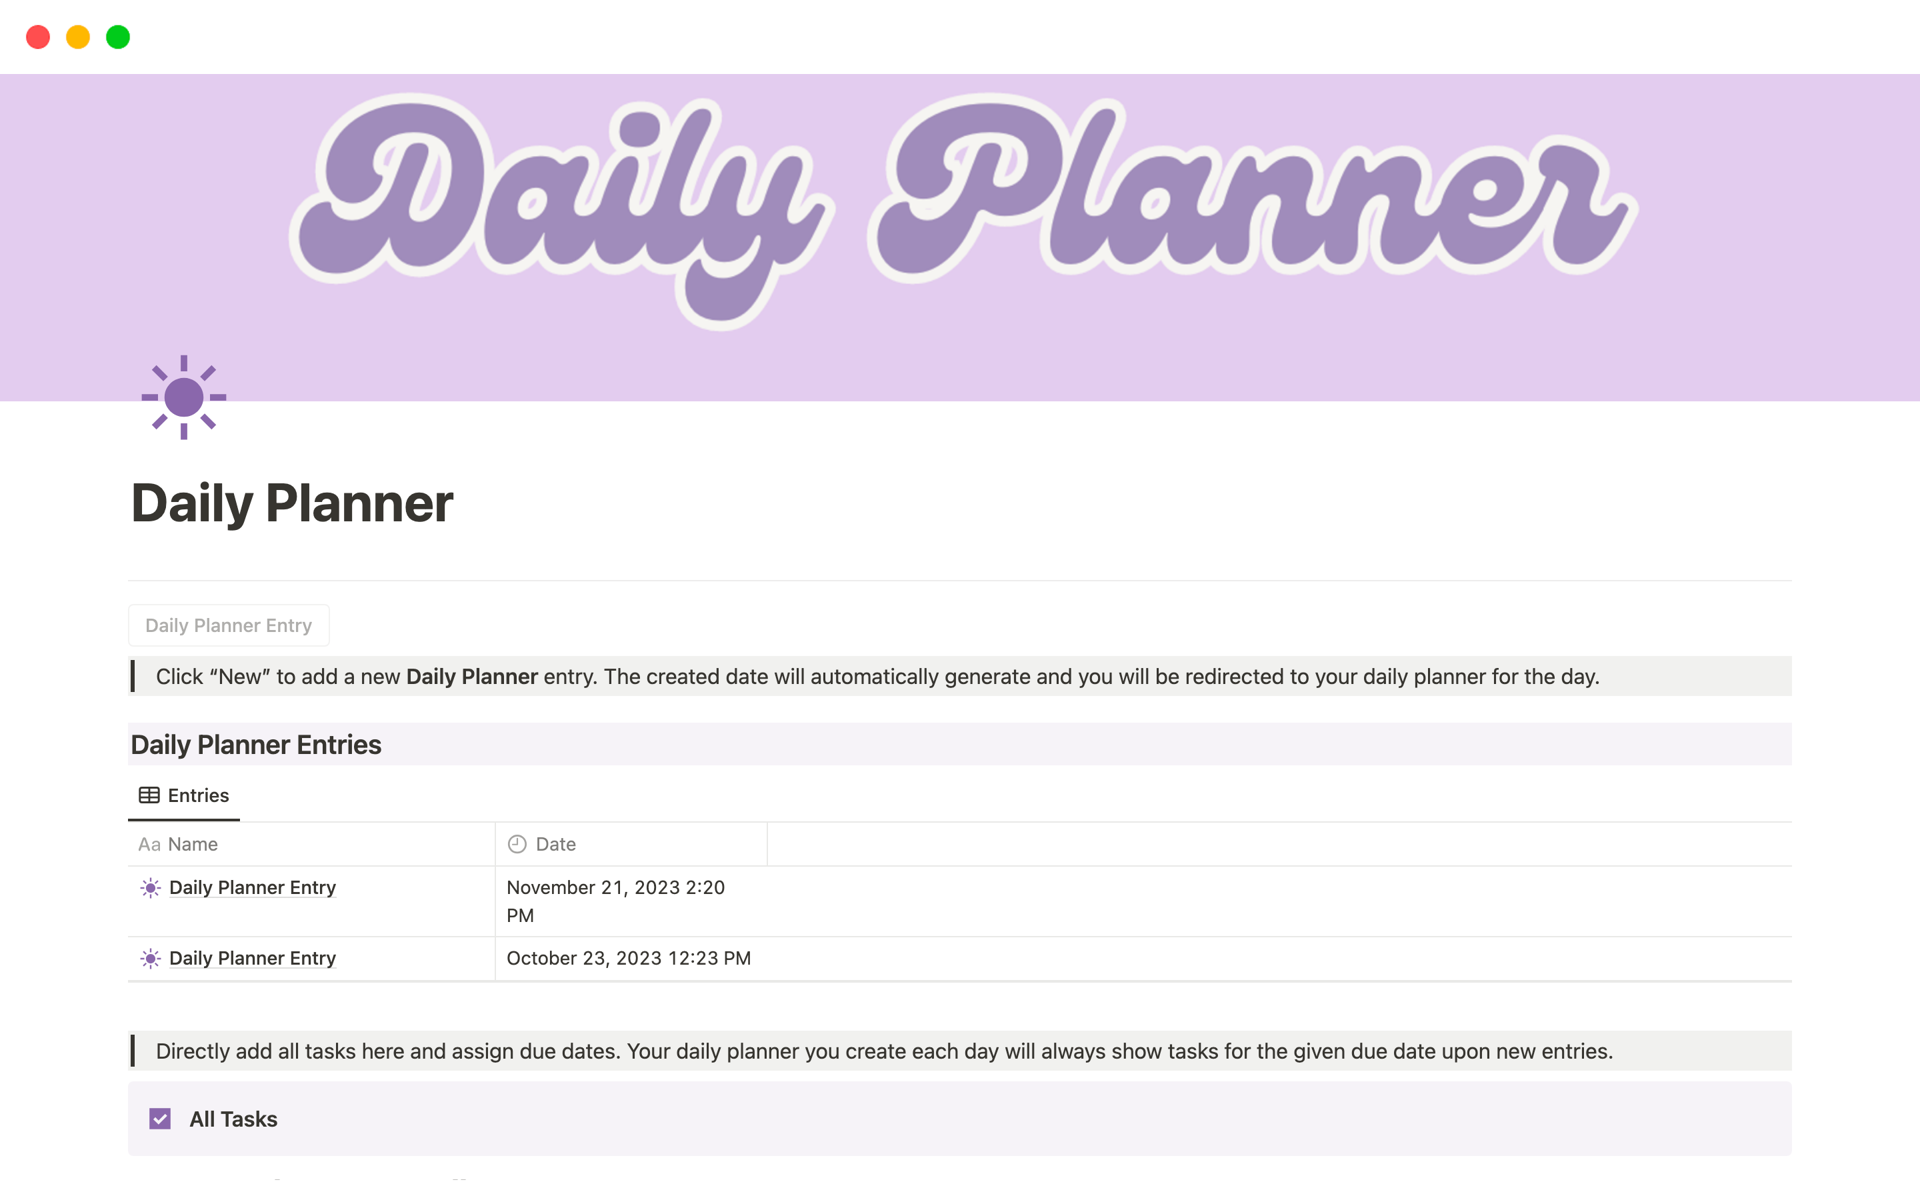 Simple Daily Planner to track the day's tasks and goals